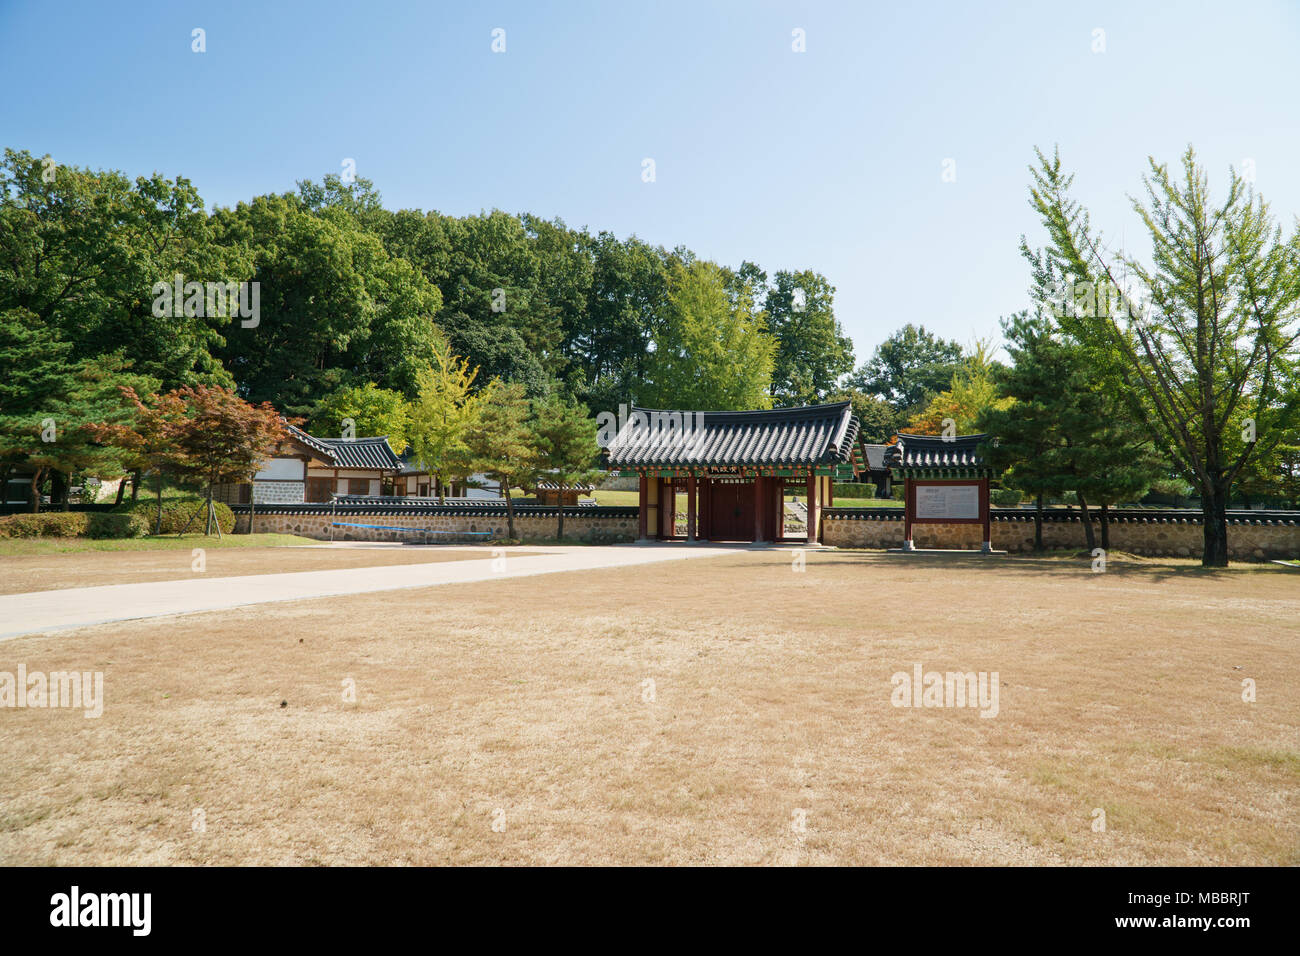 PAJU, KOREA - OCTOBER 05, 2014: View of Bangujeong, historic site about Hwang hui in Joseon Dynasty Stock Photo